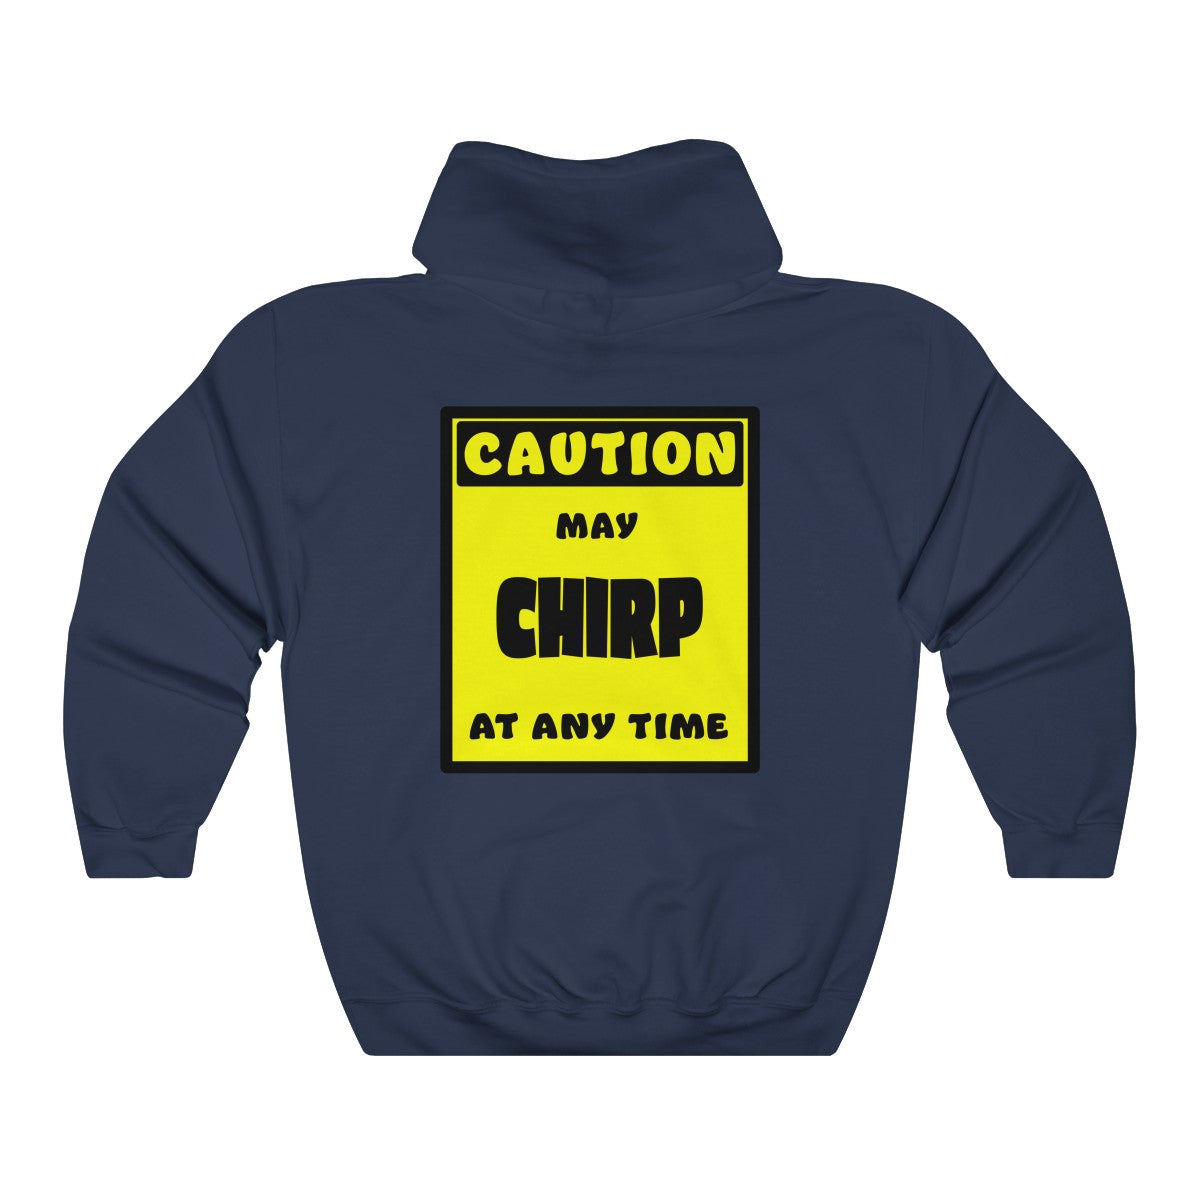 CAUTION! May CHIRP at any time! - Hoodie Hoodie AFLT-Whootorca Navy Blue S 